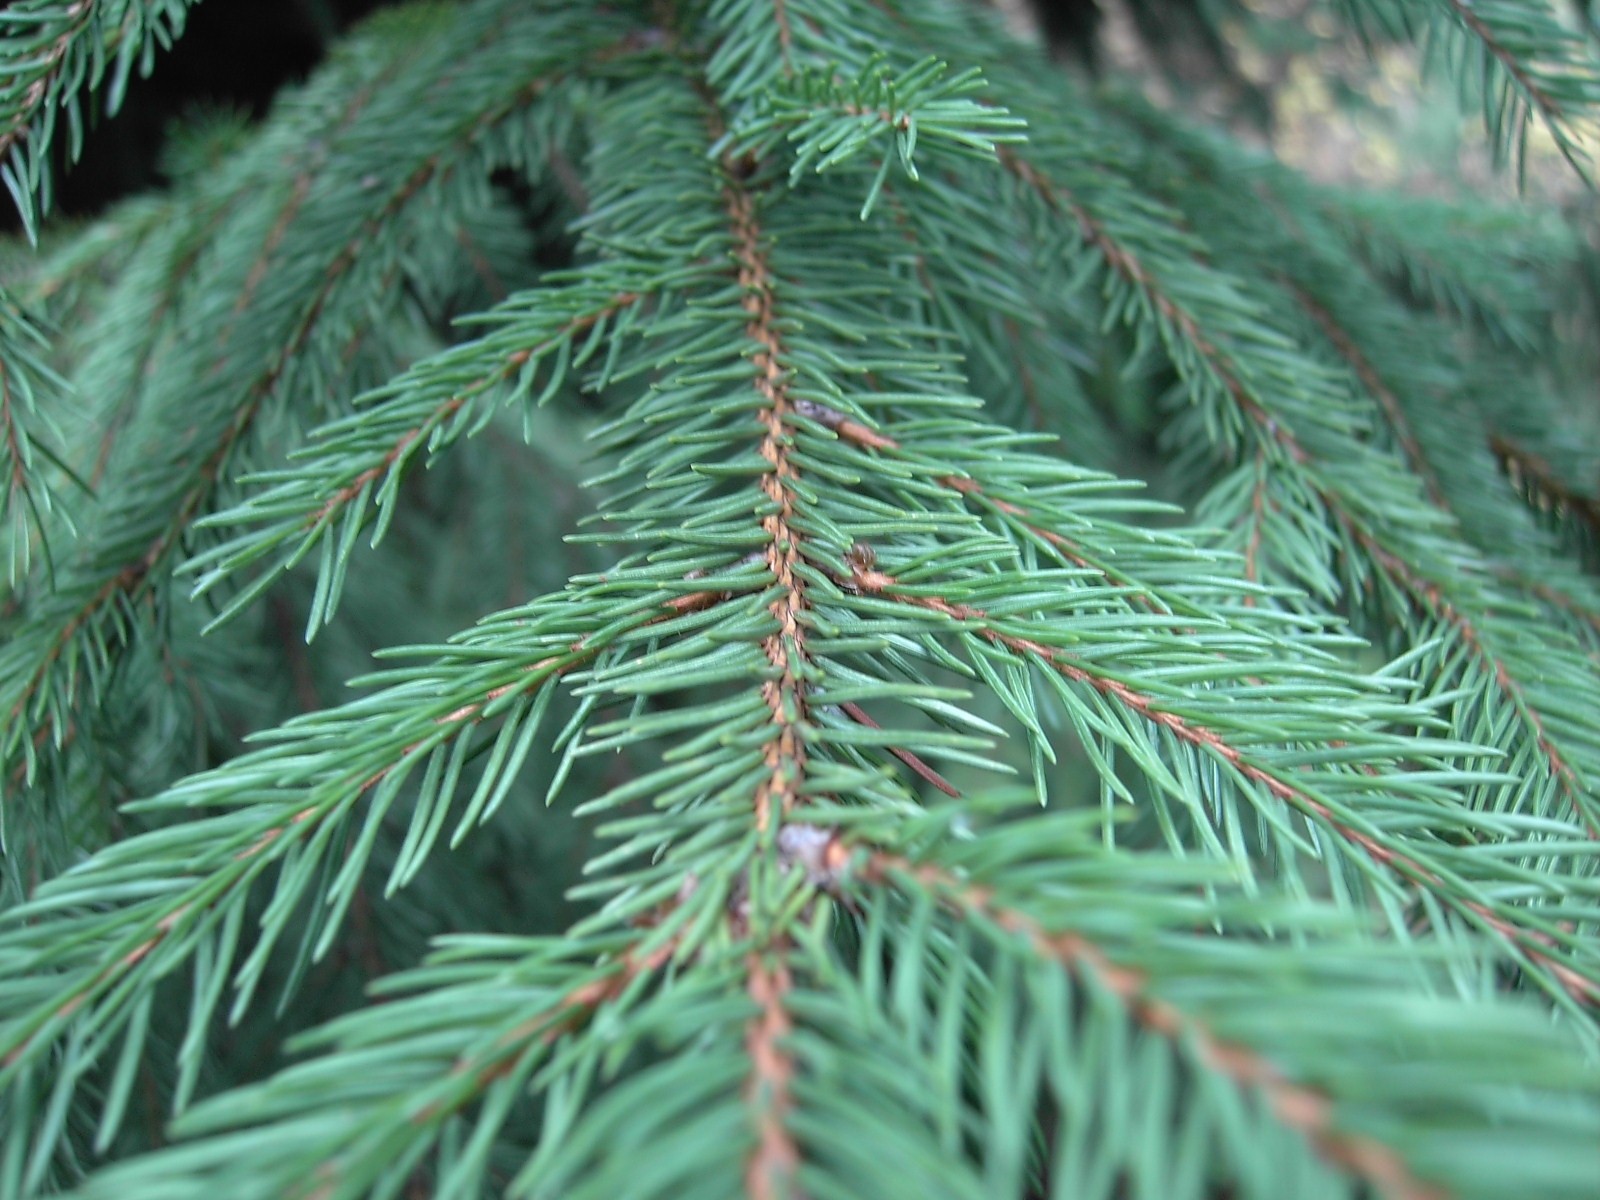 plants, needle, fir-trees, green High Definition image